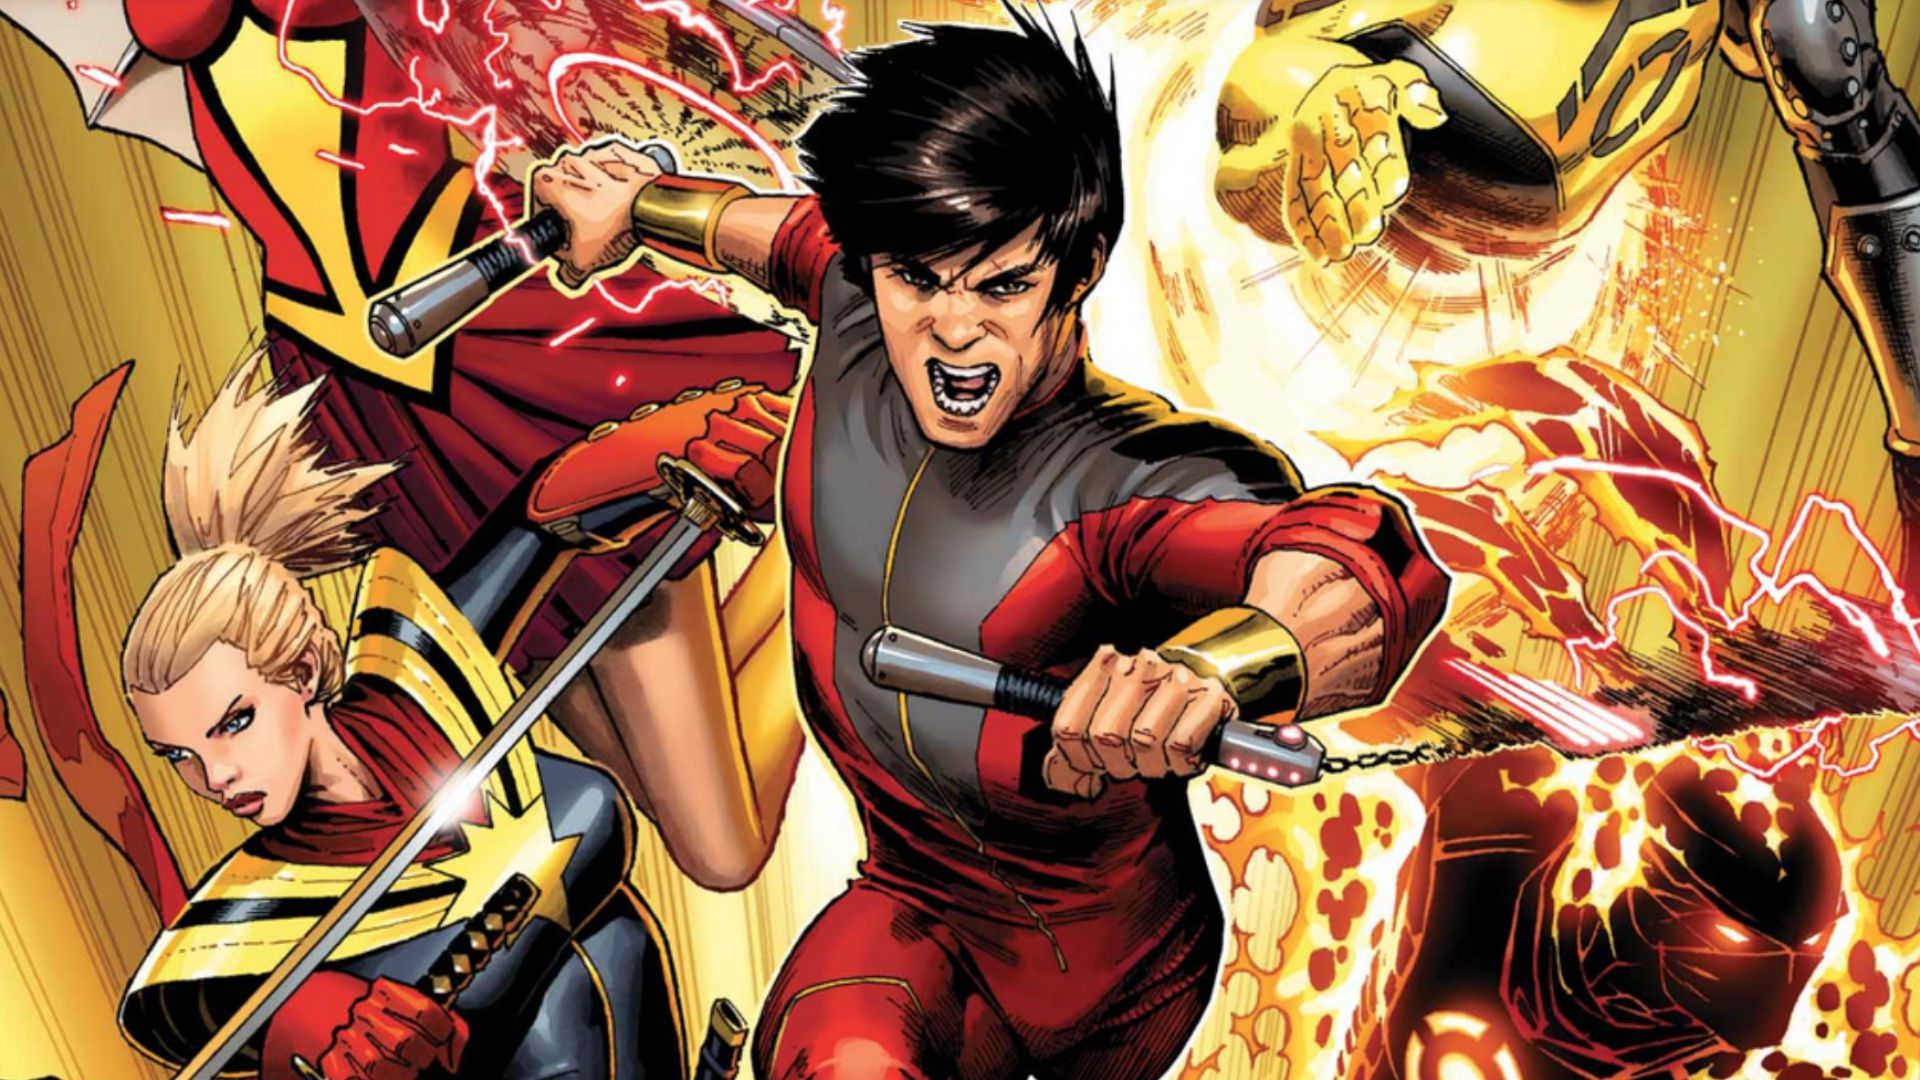 ShangChi and the Legend of the Ten Rings 2021 4K wallpaper download